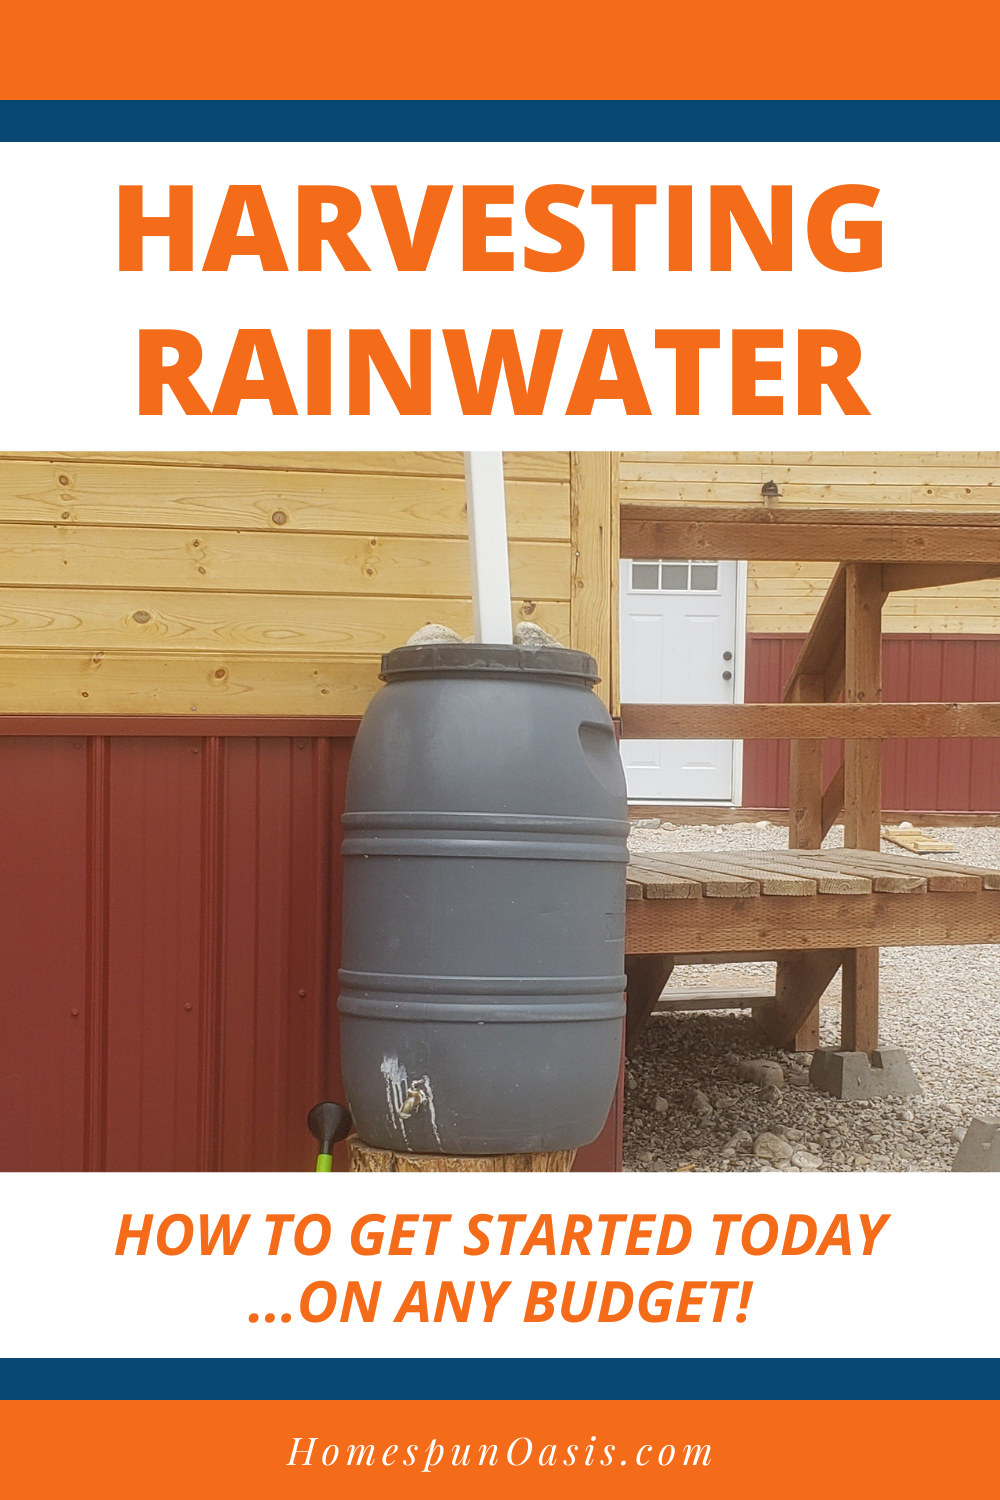 Harvesting Rainwater: How to Get Started Today